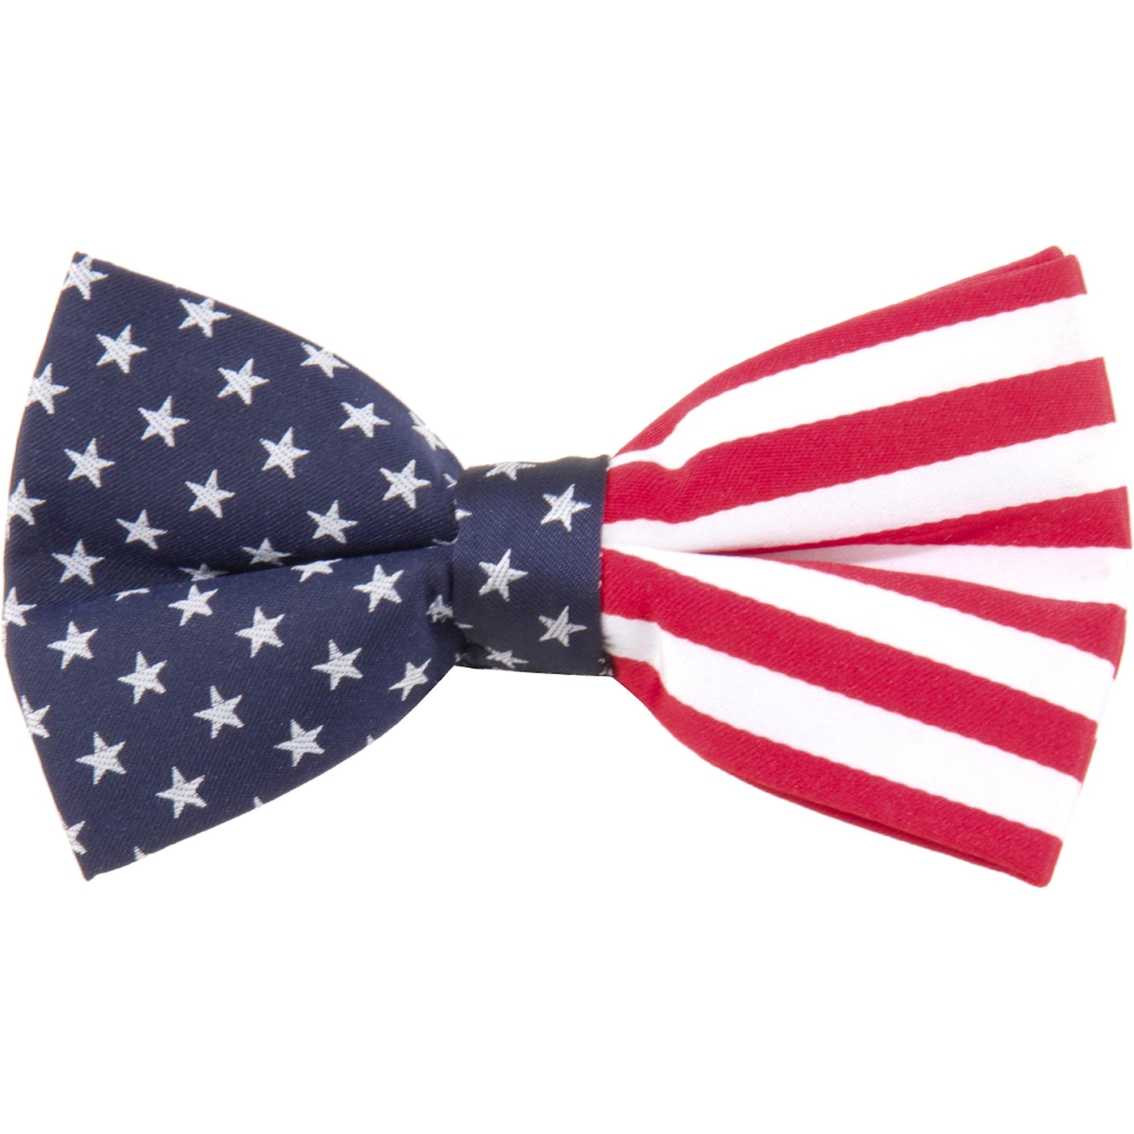 Eagles Wings American Flag Bow Tie | Ties | Clothing & Accessories ...